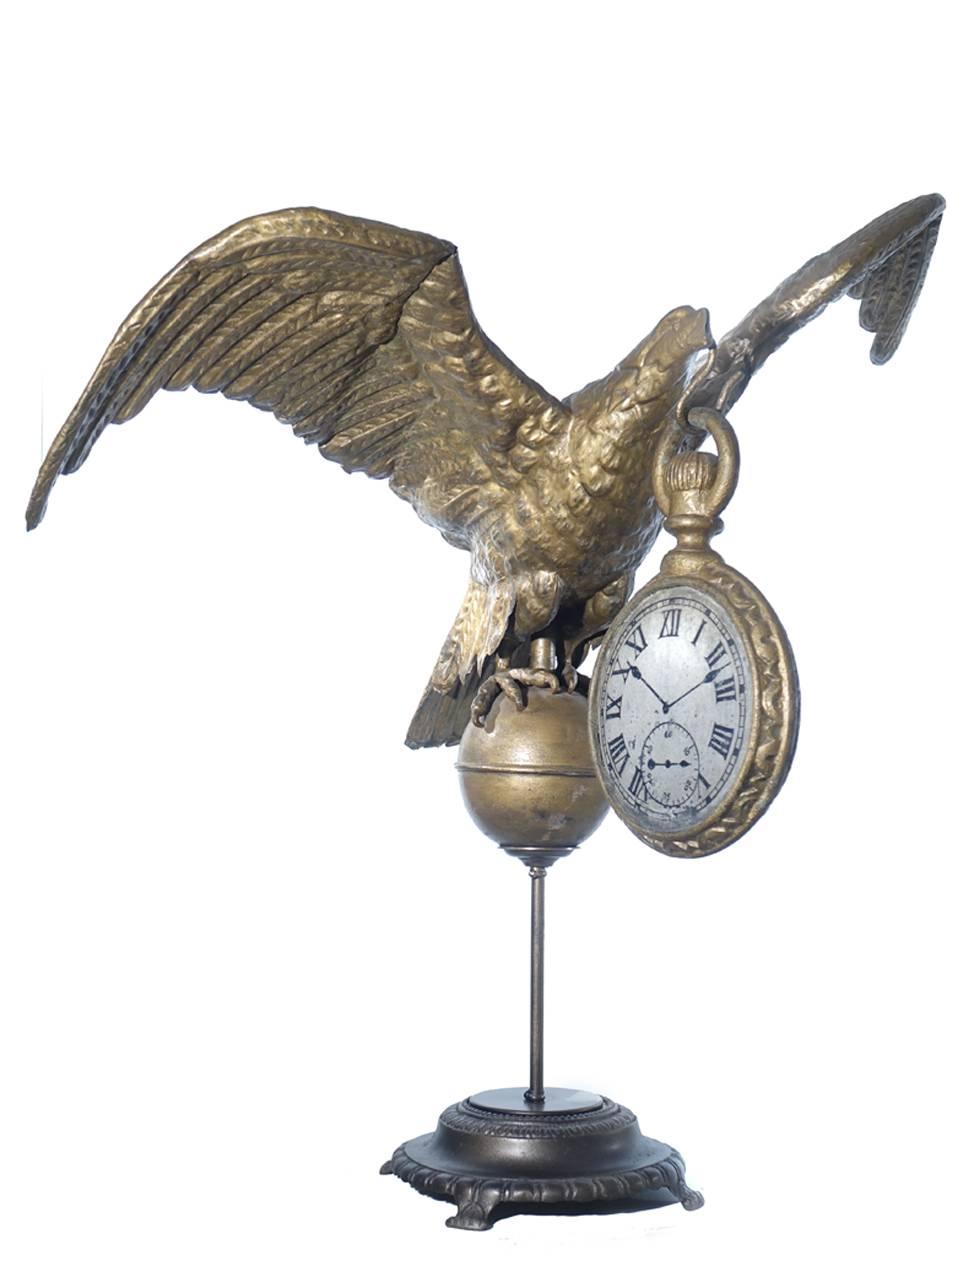 This is an impressive eagle sign with a 3 foot wingspan. The pocket watch is hand-painted cast iron and tin. There are a few small dents here and there but the overall look is amazing.